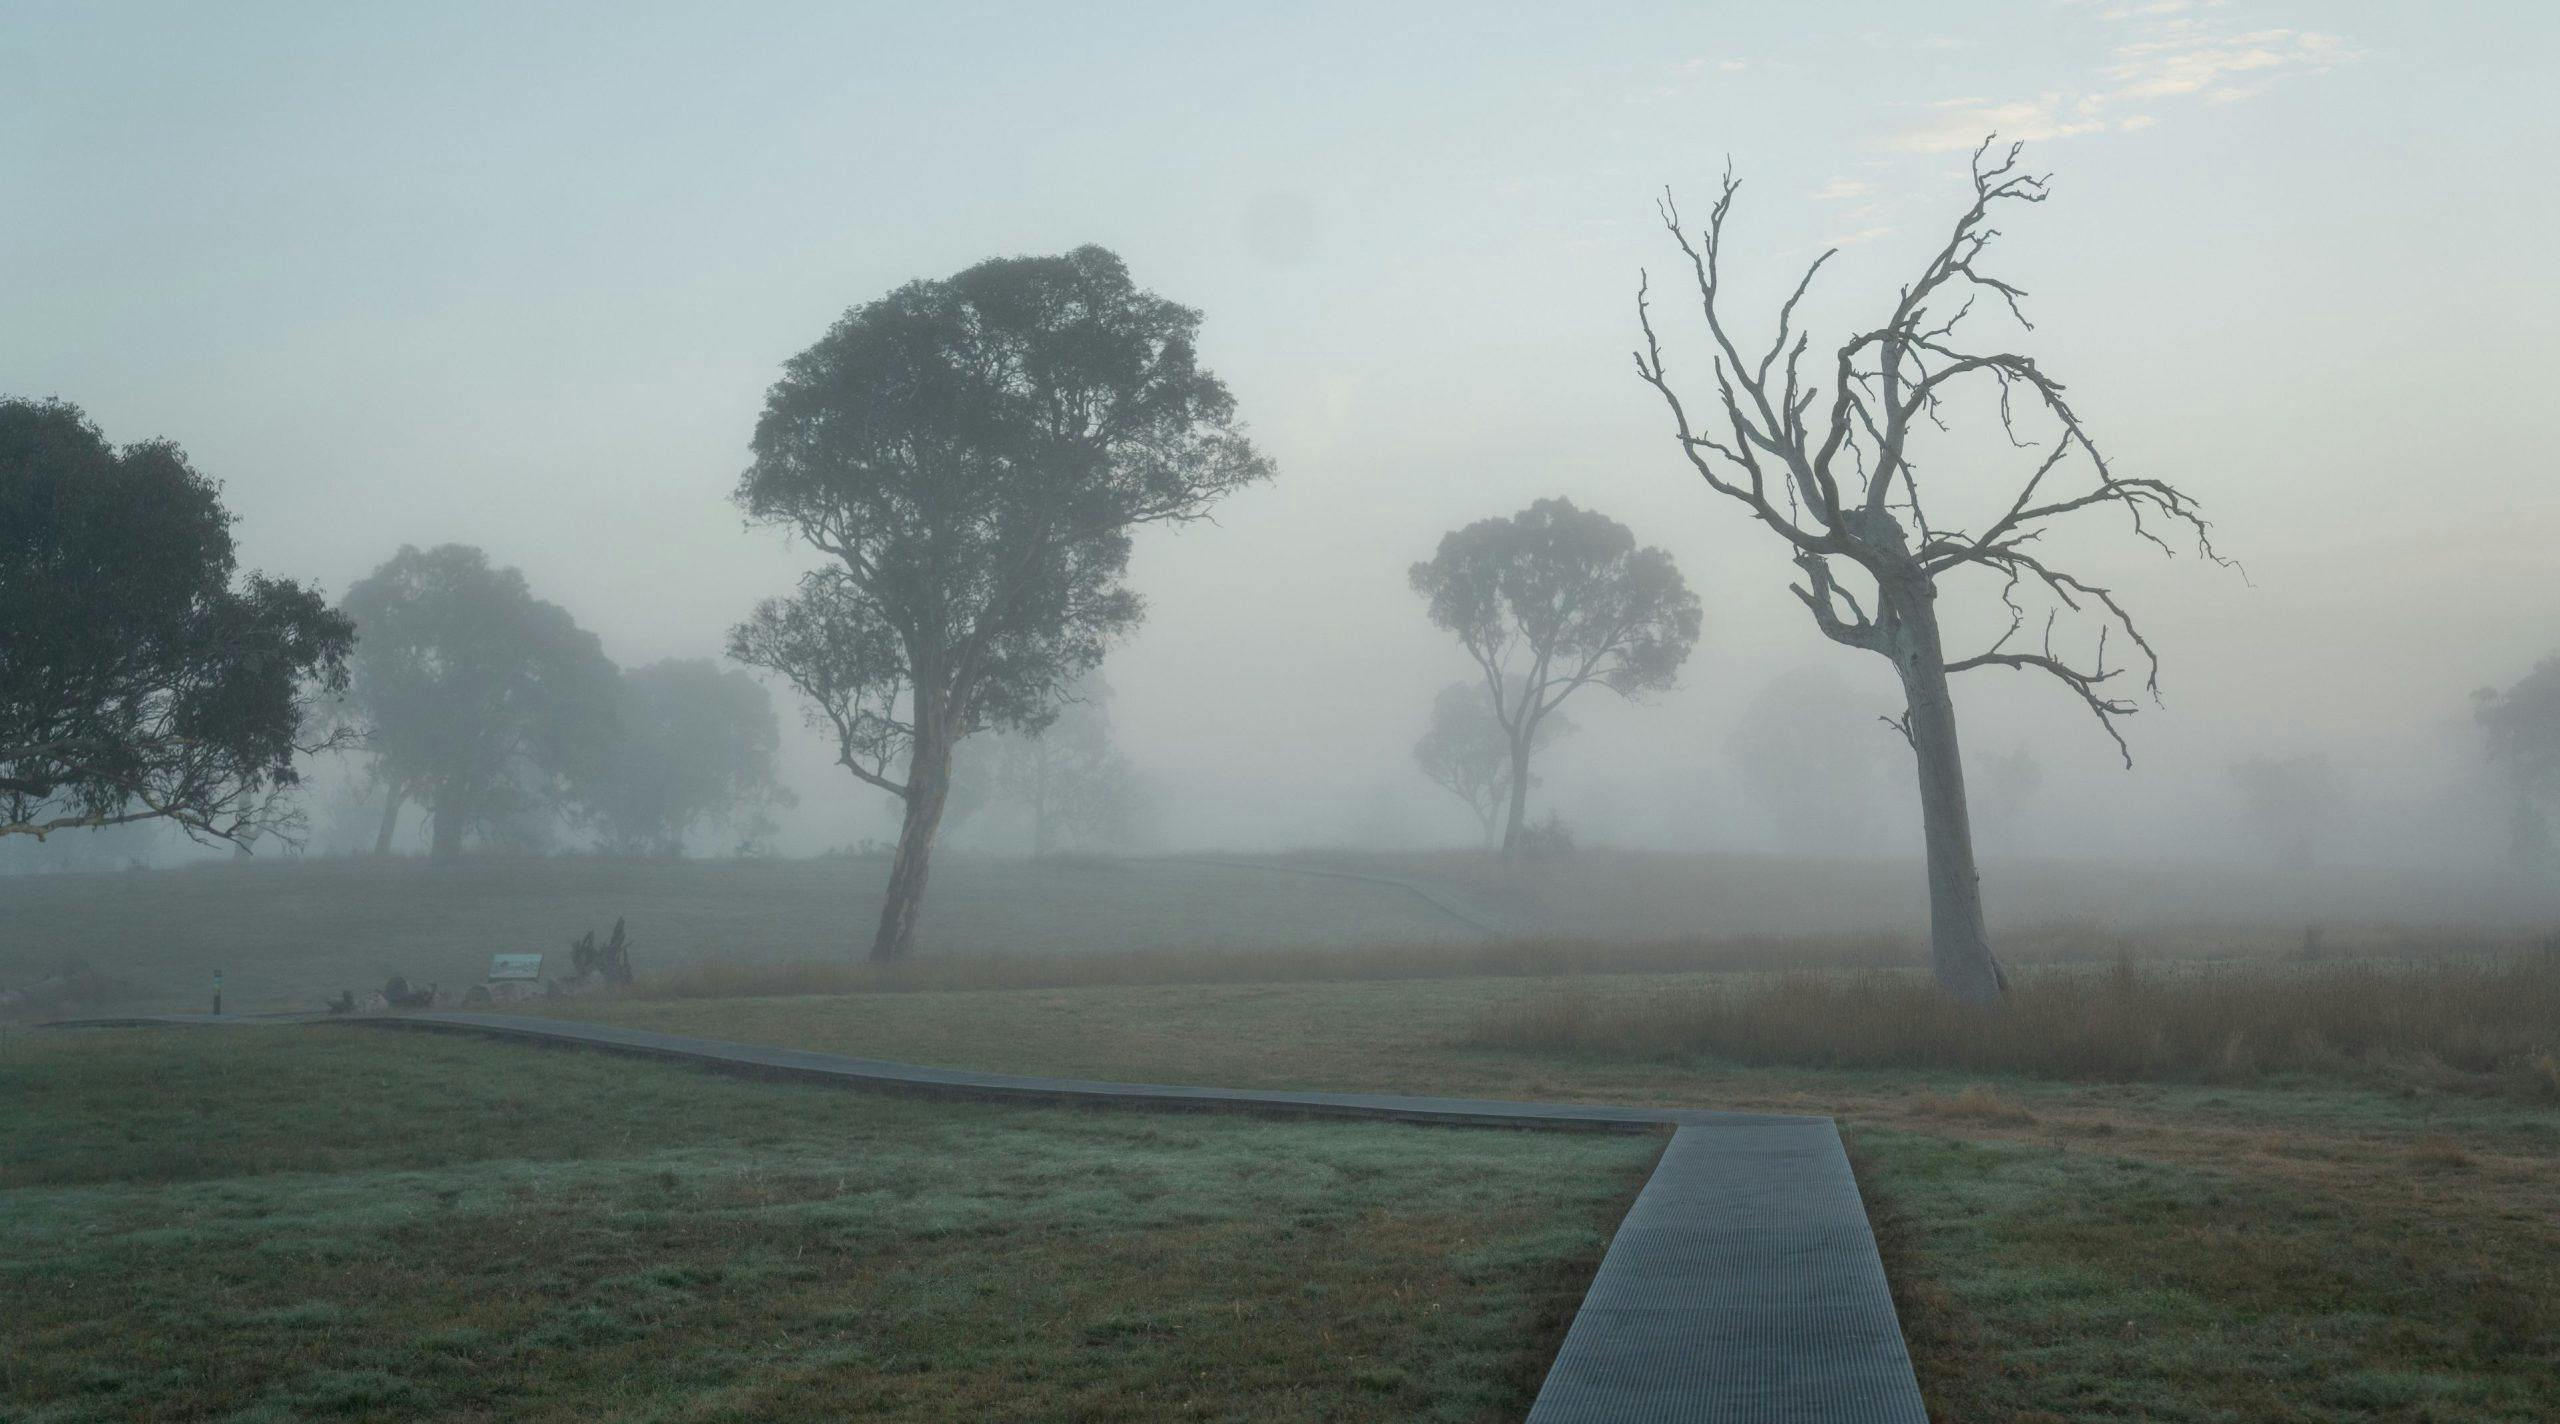 A wooden boardwalk leads across a grassy landscape. There are trees and fog in the distance.